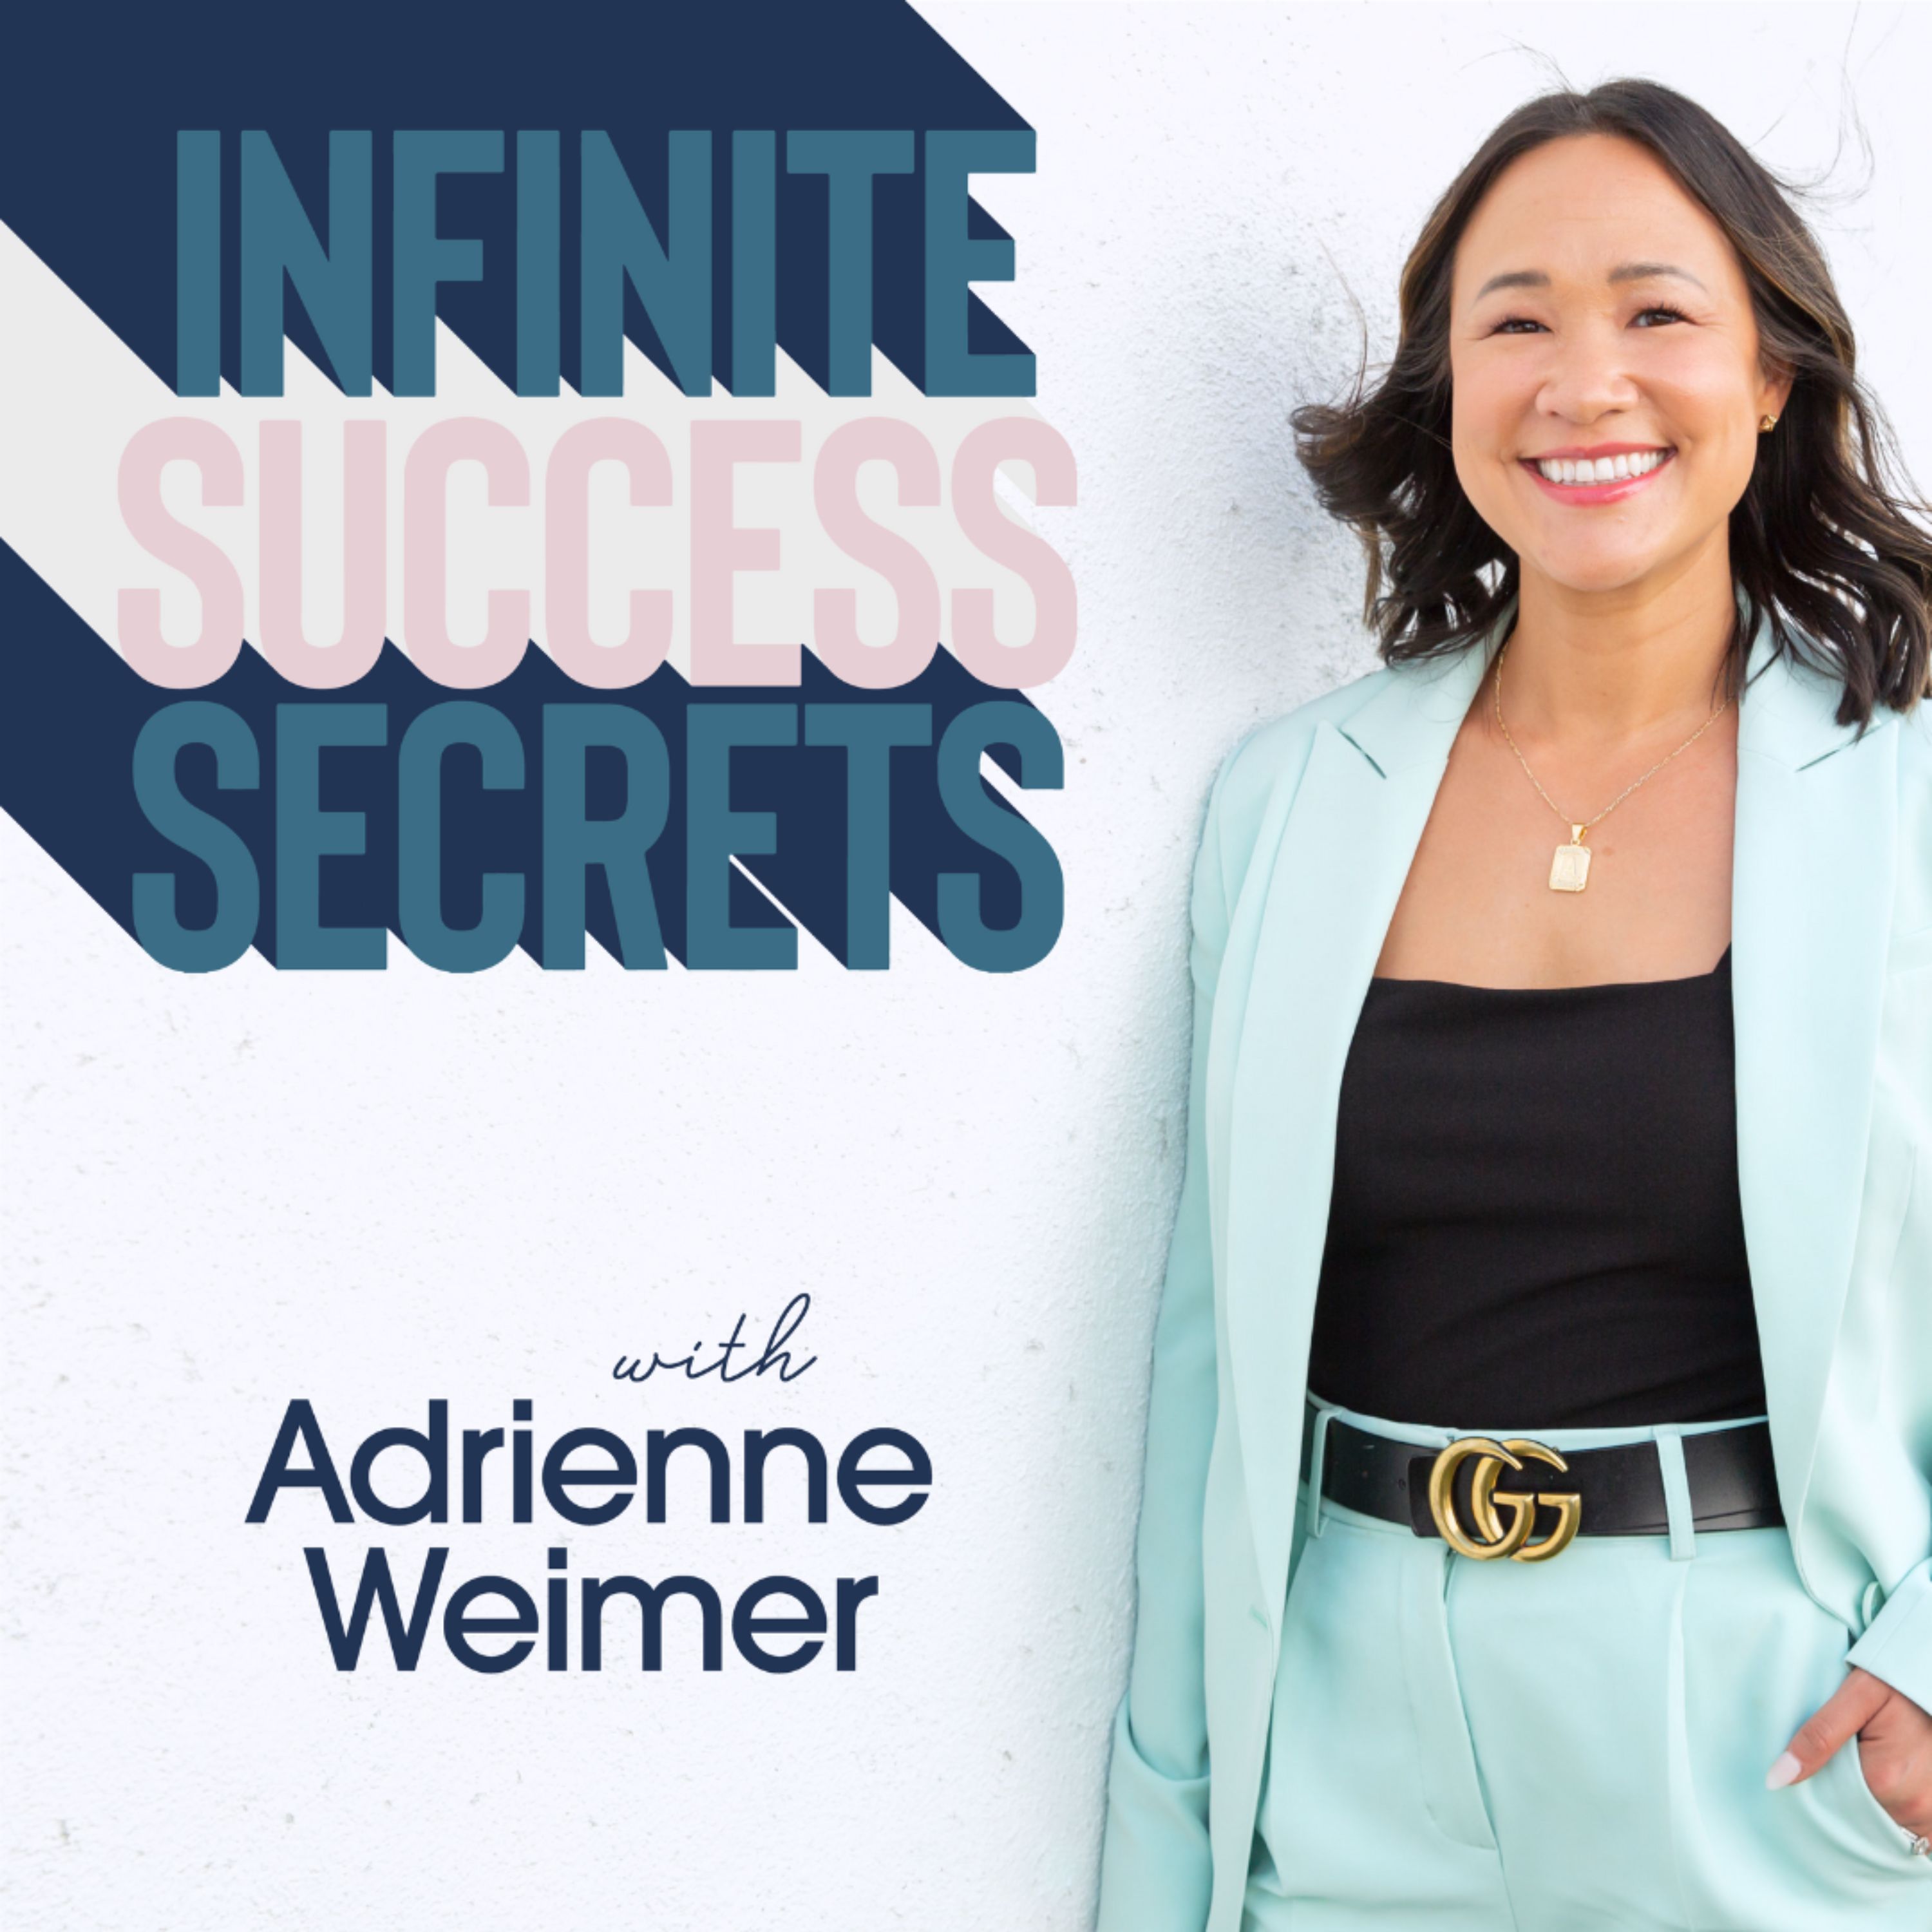 Artwork for Infinite Success Secrets with Adrienne Weimer